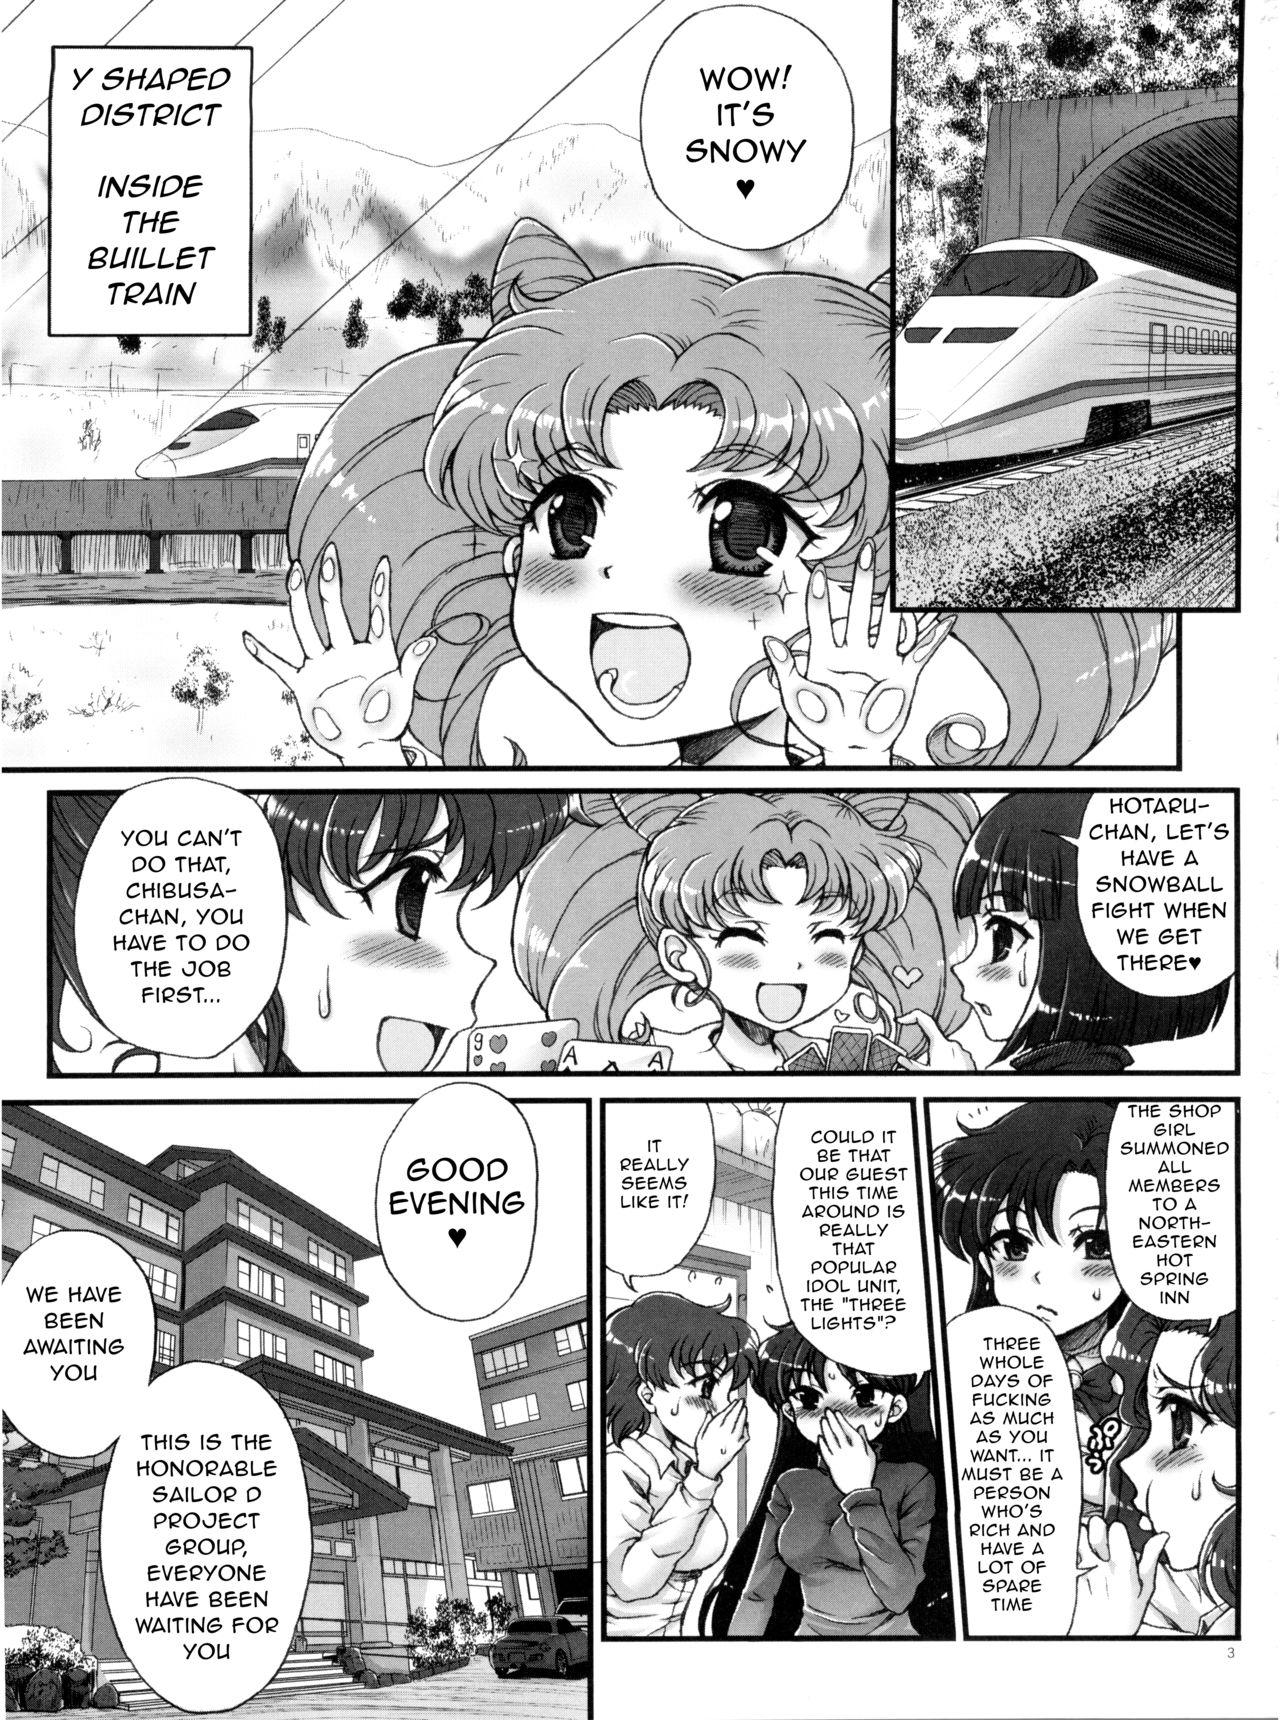 Hot Naked Women Sailor Delivery Health All Stars - Sailor moon Licking - Page 2